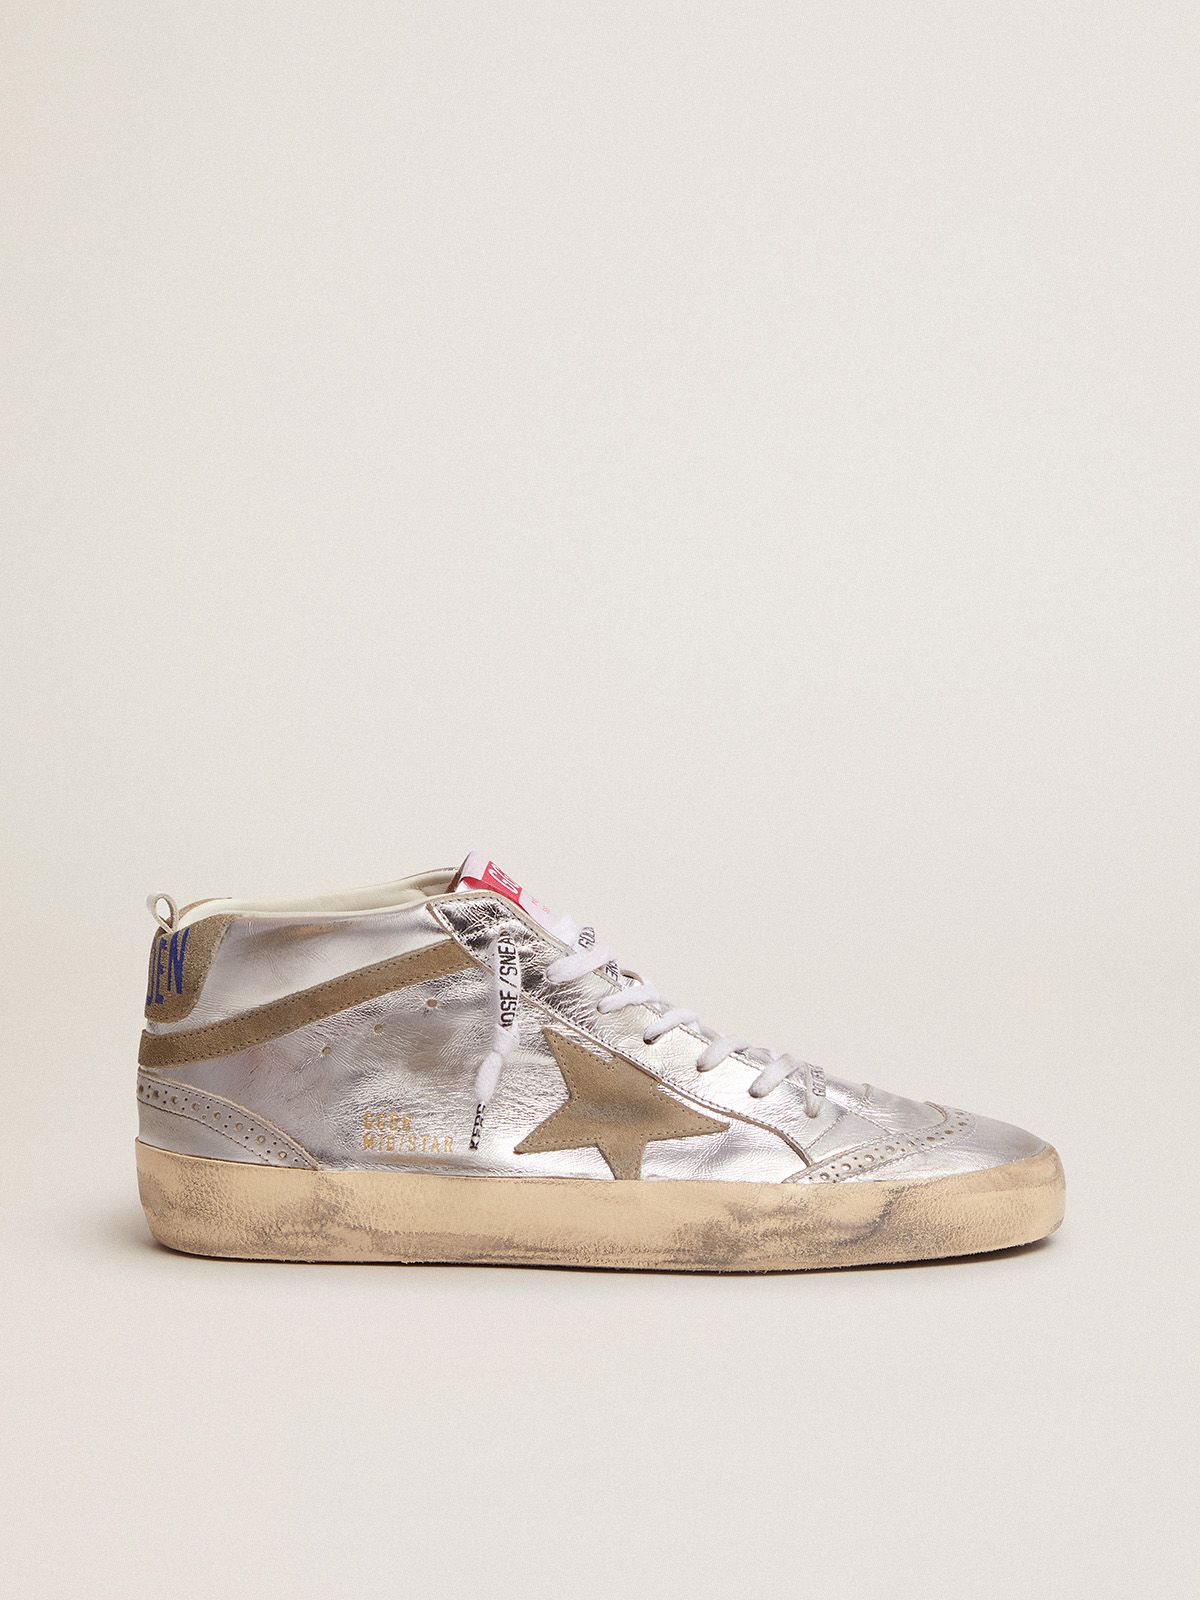 Mid Star sneakers in silver metallic leather with star and flash in dove-gray suede